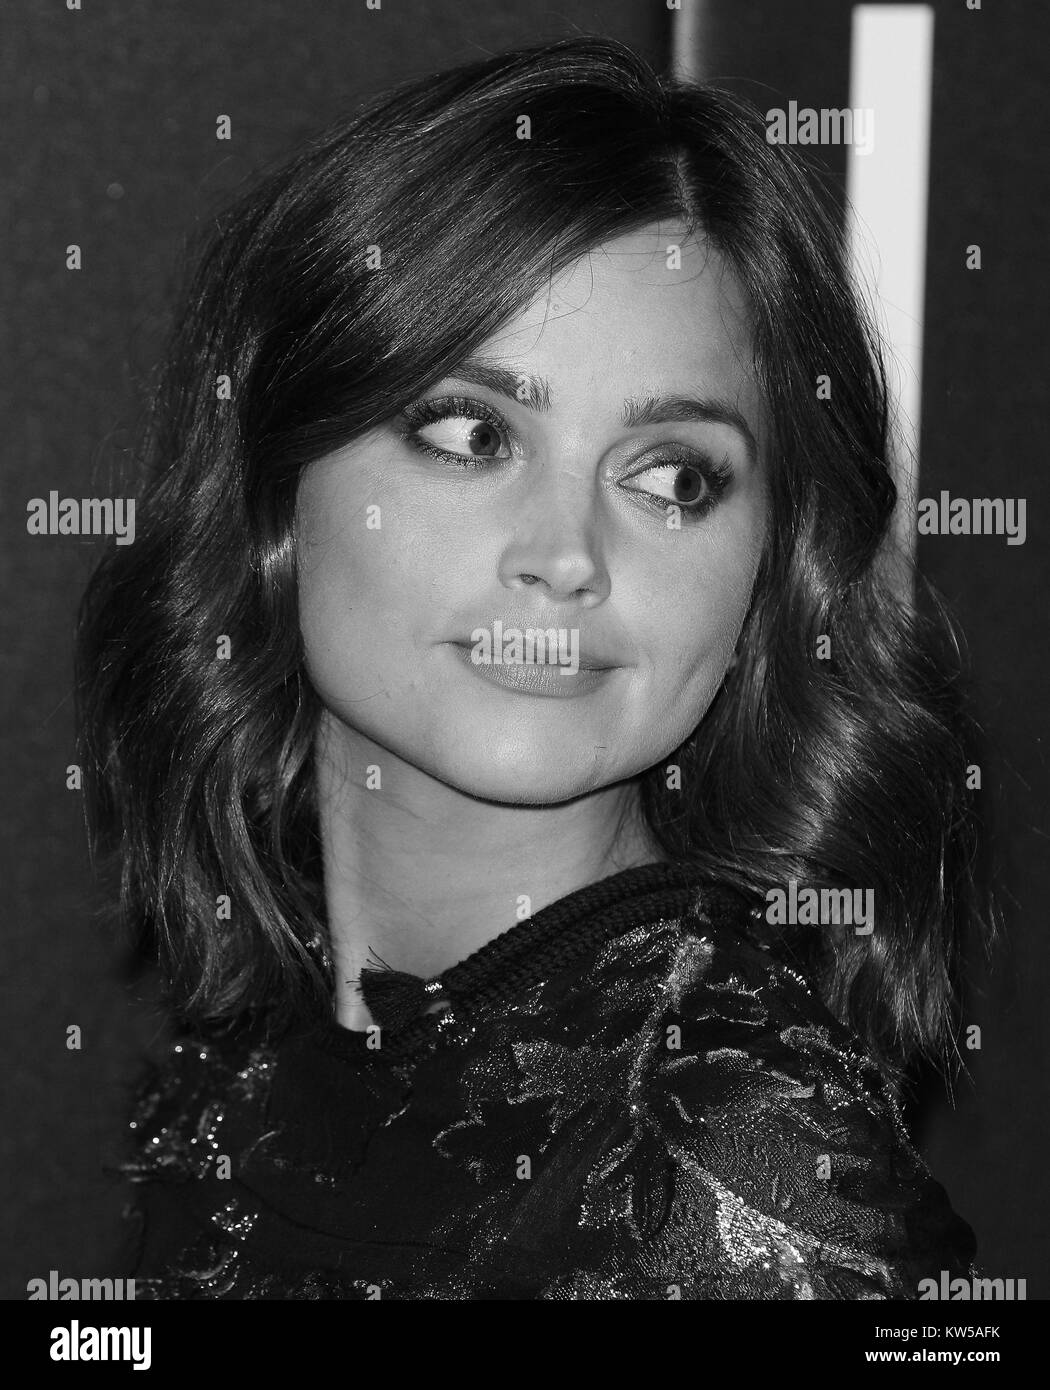 Jenna coleman Black and White Stock Photos & Images - Alamy